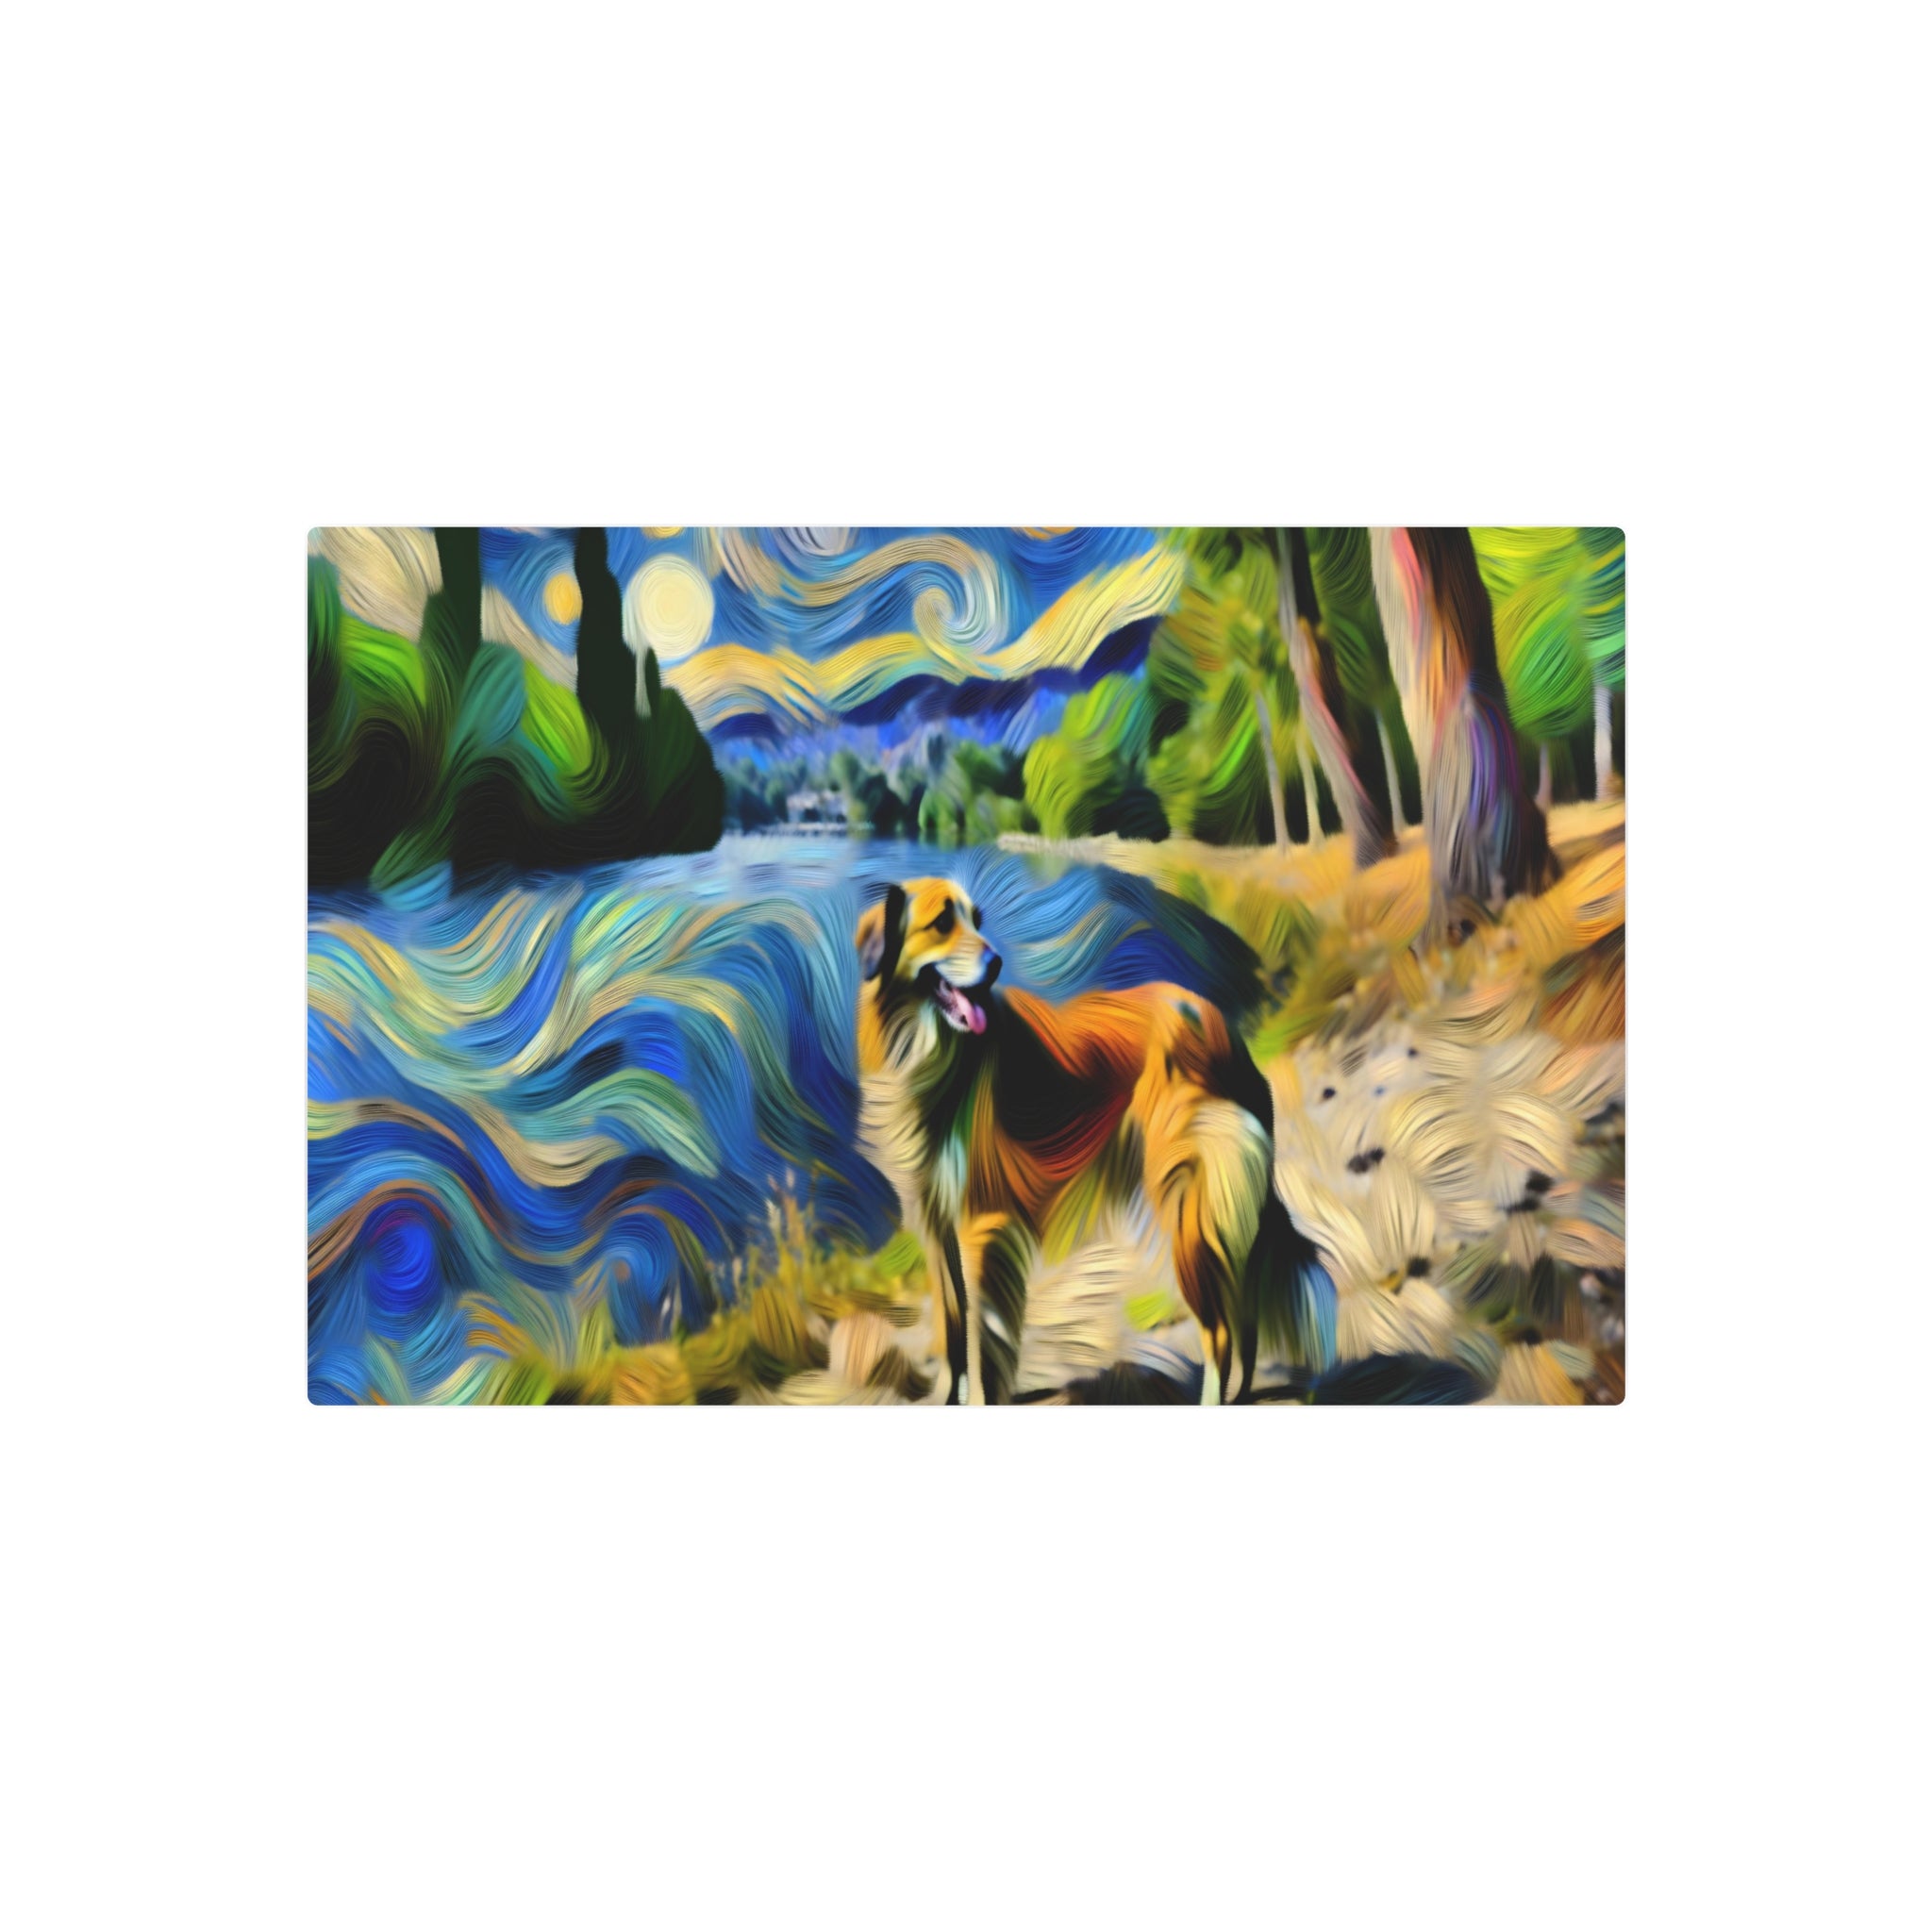 Metal Poster Art | "Post-Impressionism Art Print - Vibrant Western Art Style Featuring a Loyal Dog by a Picturesque River, Expressing Artist's Subject - Metal Poster Art 30″ x 20″ (Horizontal) 0.12''